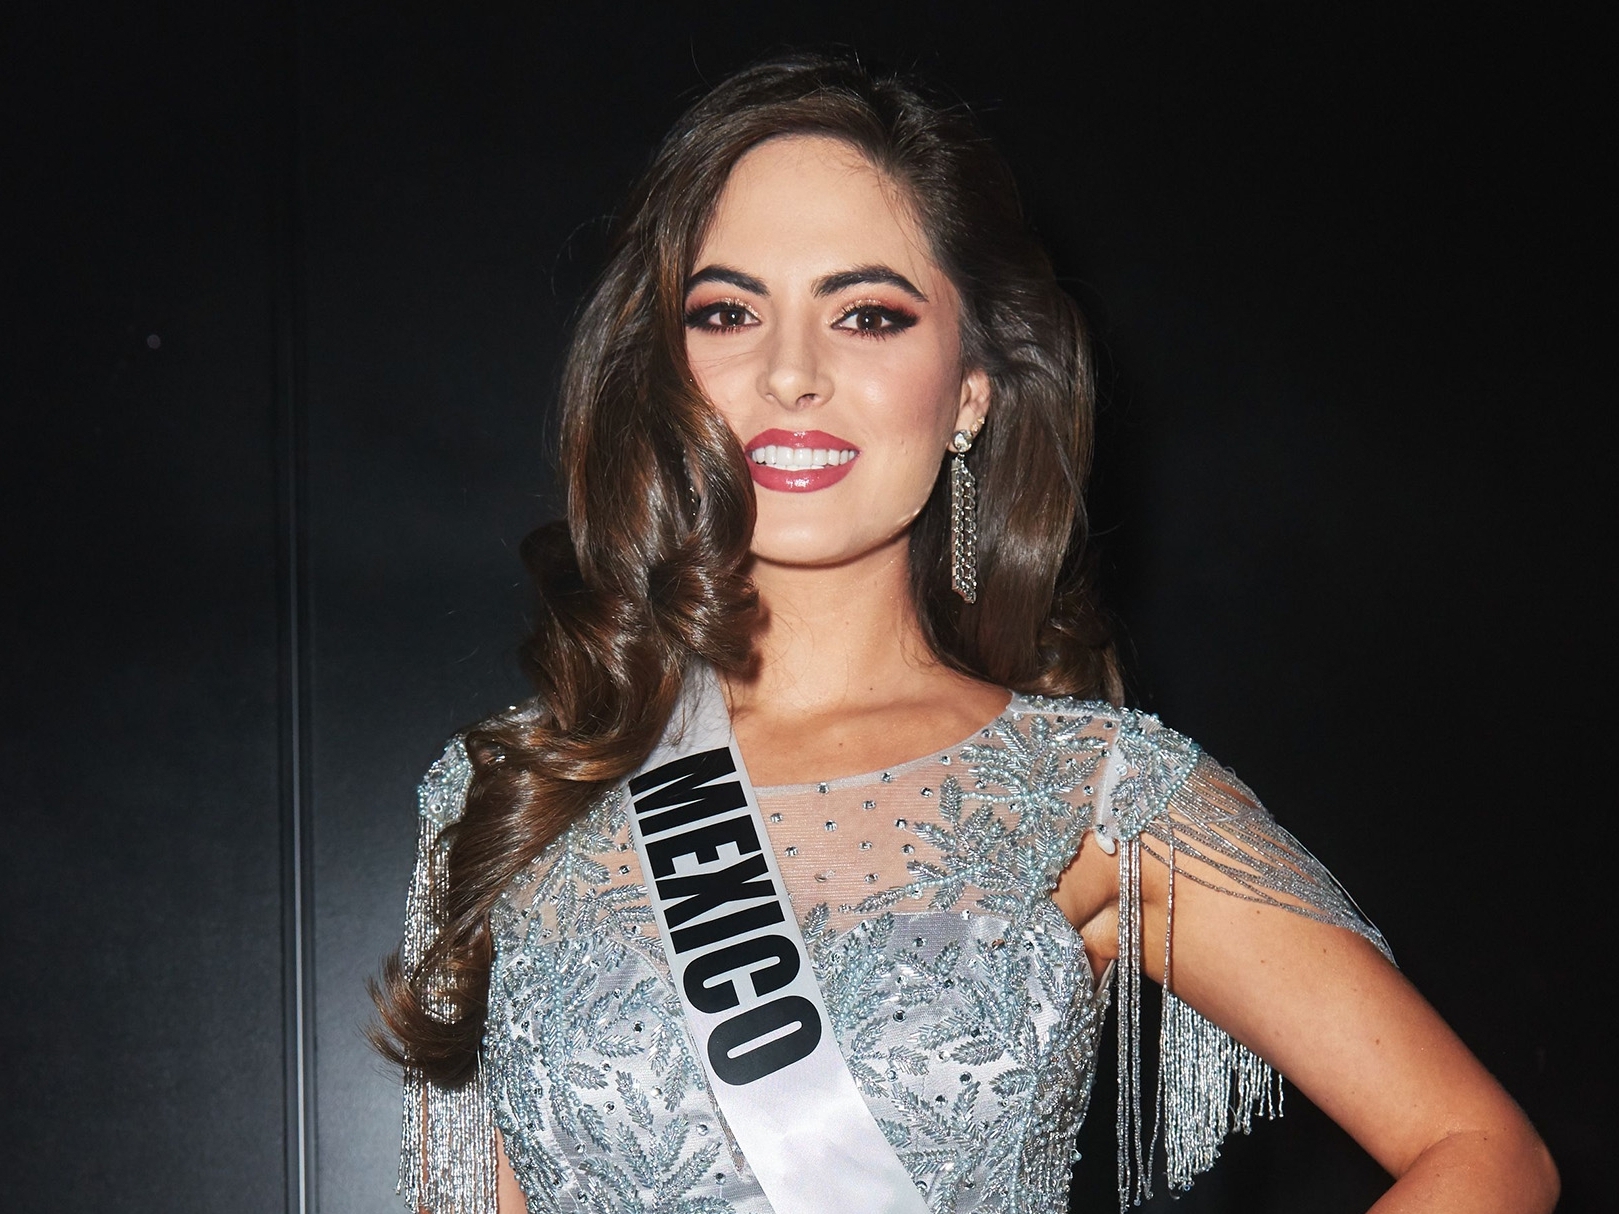 Mandatory Credit: Photo by Miss Universe Organization/ZUMA Wire/Shutterstock (10495225af)Sofía Aragón, Miss Mexico 2019 backstage during The Miss Universe CompetitionMiss Universe Competition, Backstage, Tyler Perry Studios, Atlanta, USA - 08 Dec 2019